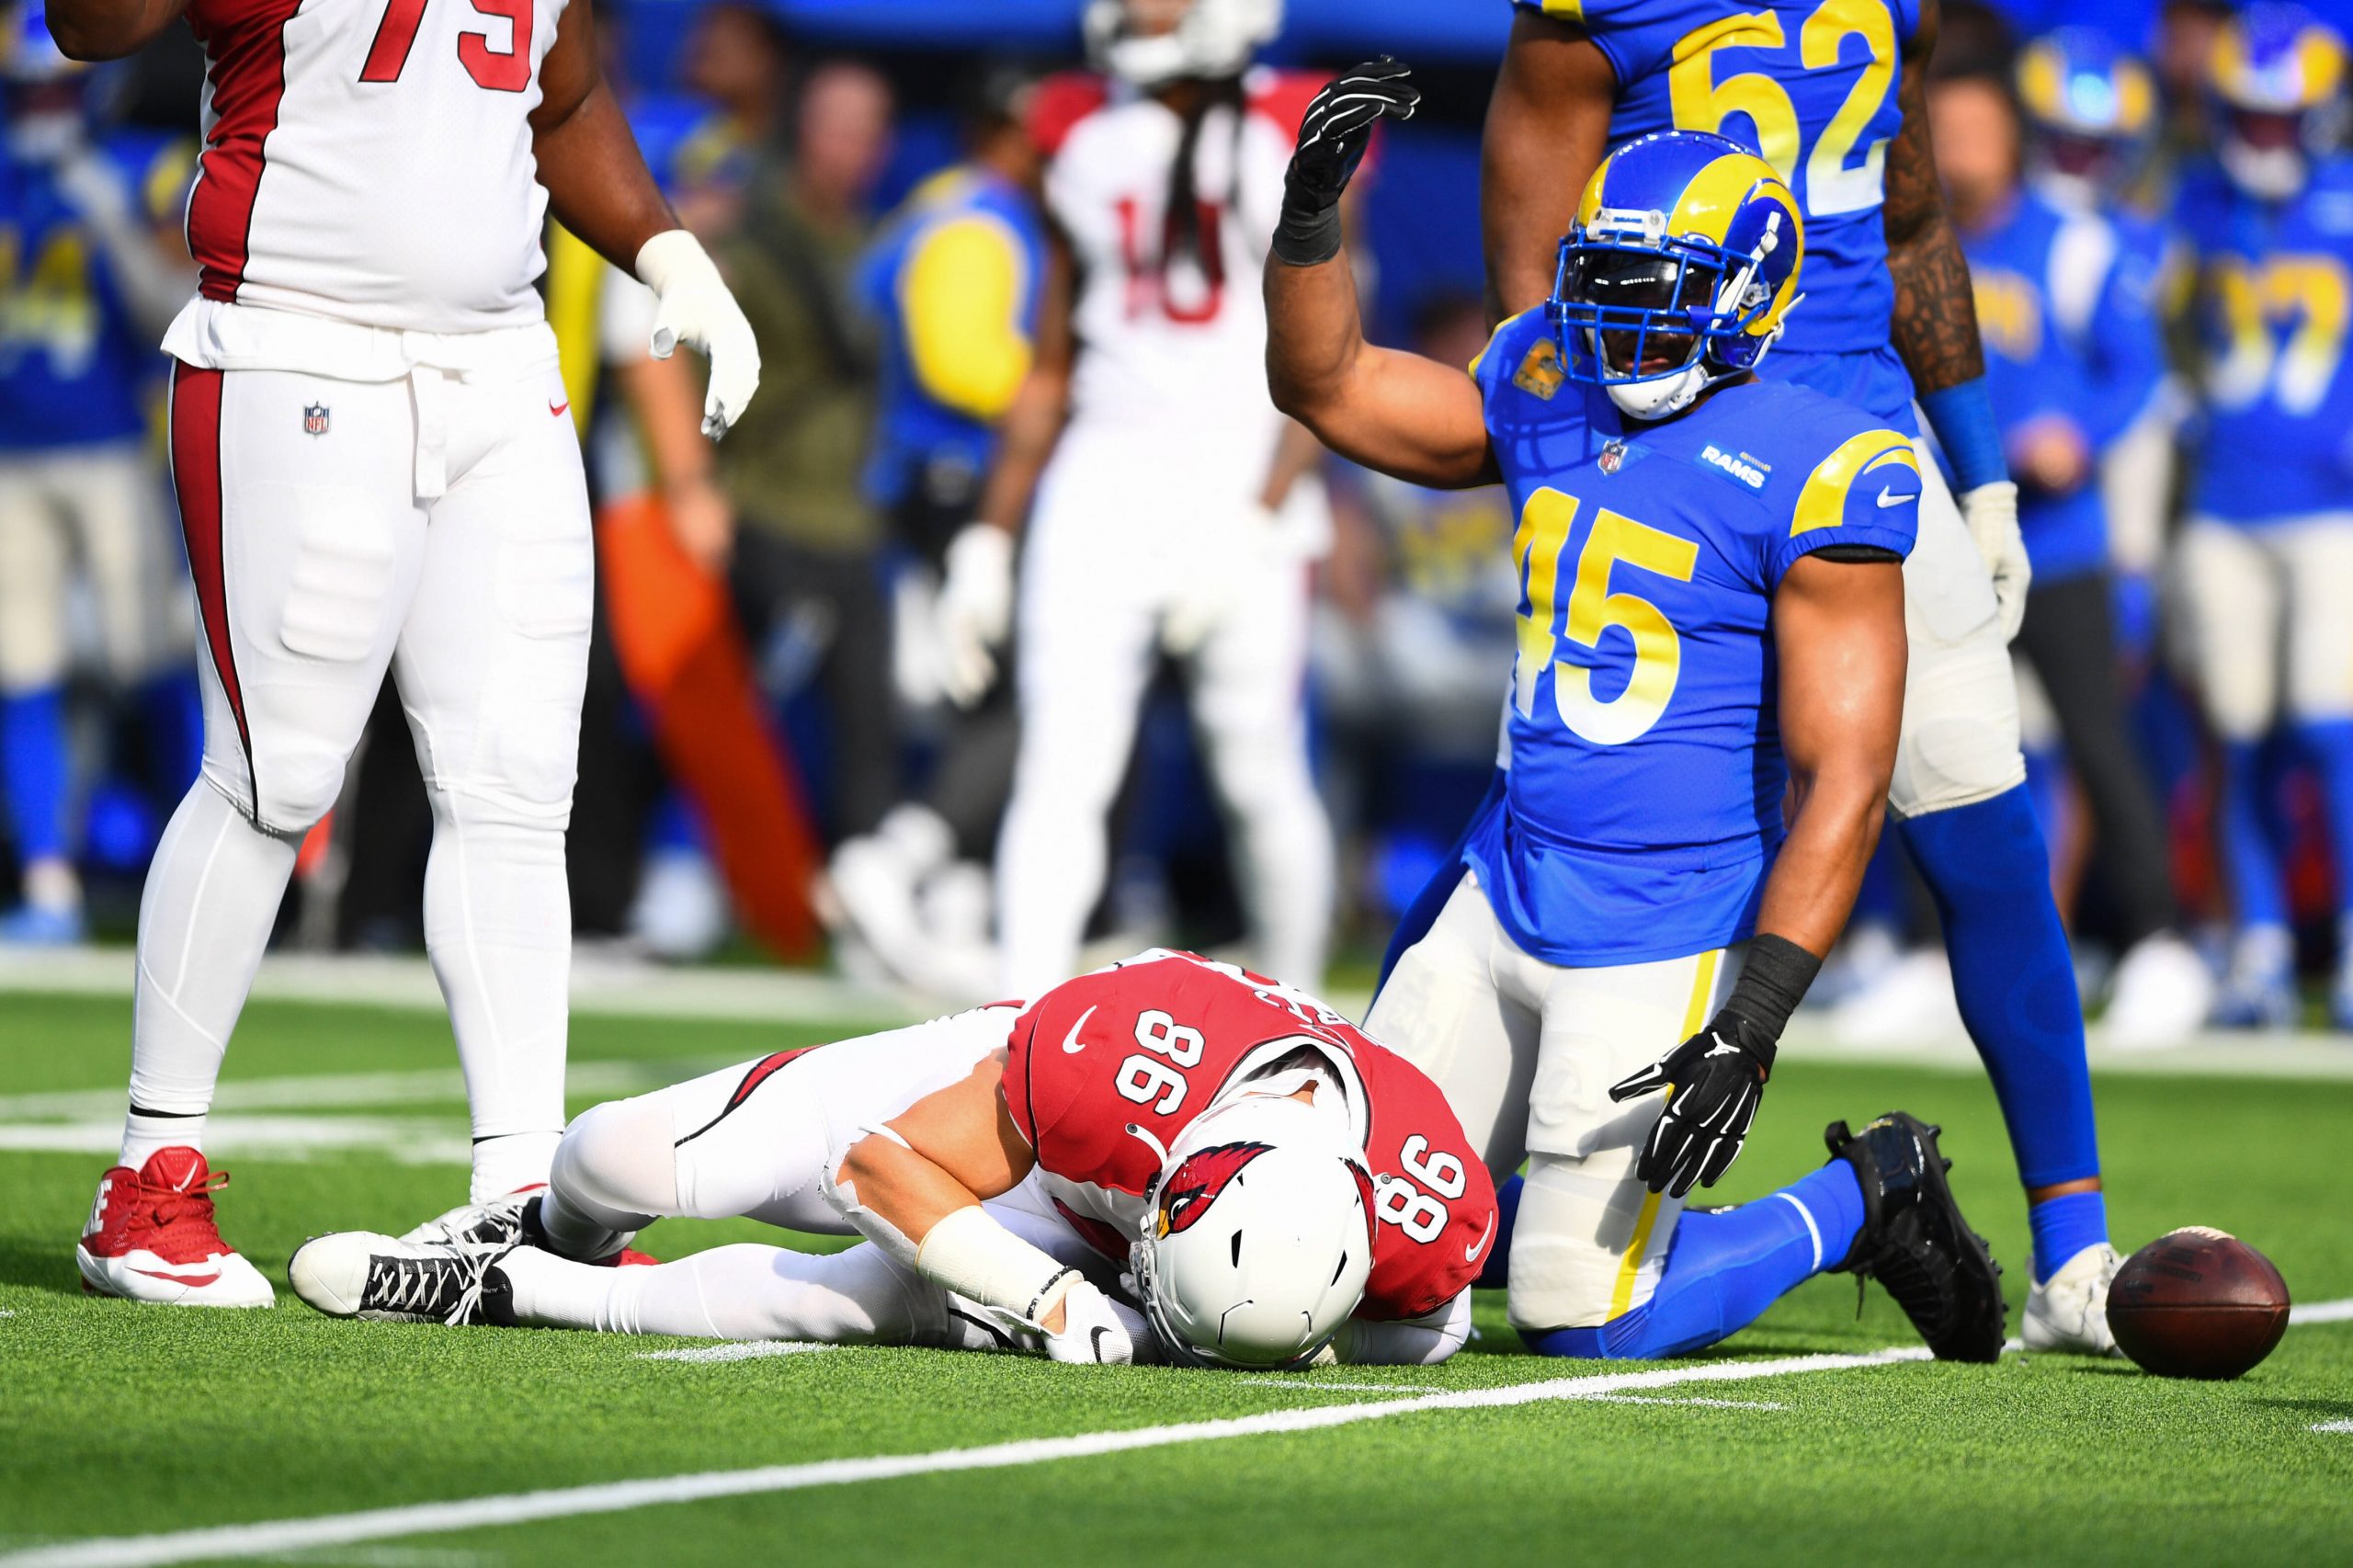 INGLEWOOD, CA - NOVEMBER 13: Los Angeles Rams Linebacker Bobby Wagner 45 calls for the trainers as Arizona Cardinals tight end Zach Ertz 86 is injured on a play during the NFL, American Football Herren, USA game between the Arizona Cardinals and the Los Angeles Rams on November 13, 2022, at SoFi Stadium in Inglewood, CA. Photo by Brian Rothmuller/Icon Sportswire NFL: NOV 13 Cardinals at Rams Icon221113023